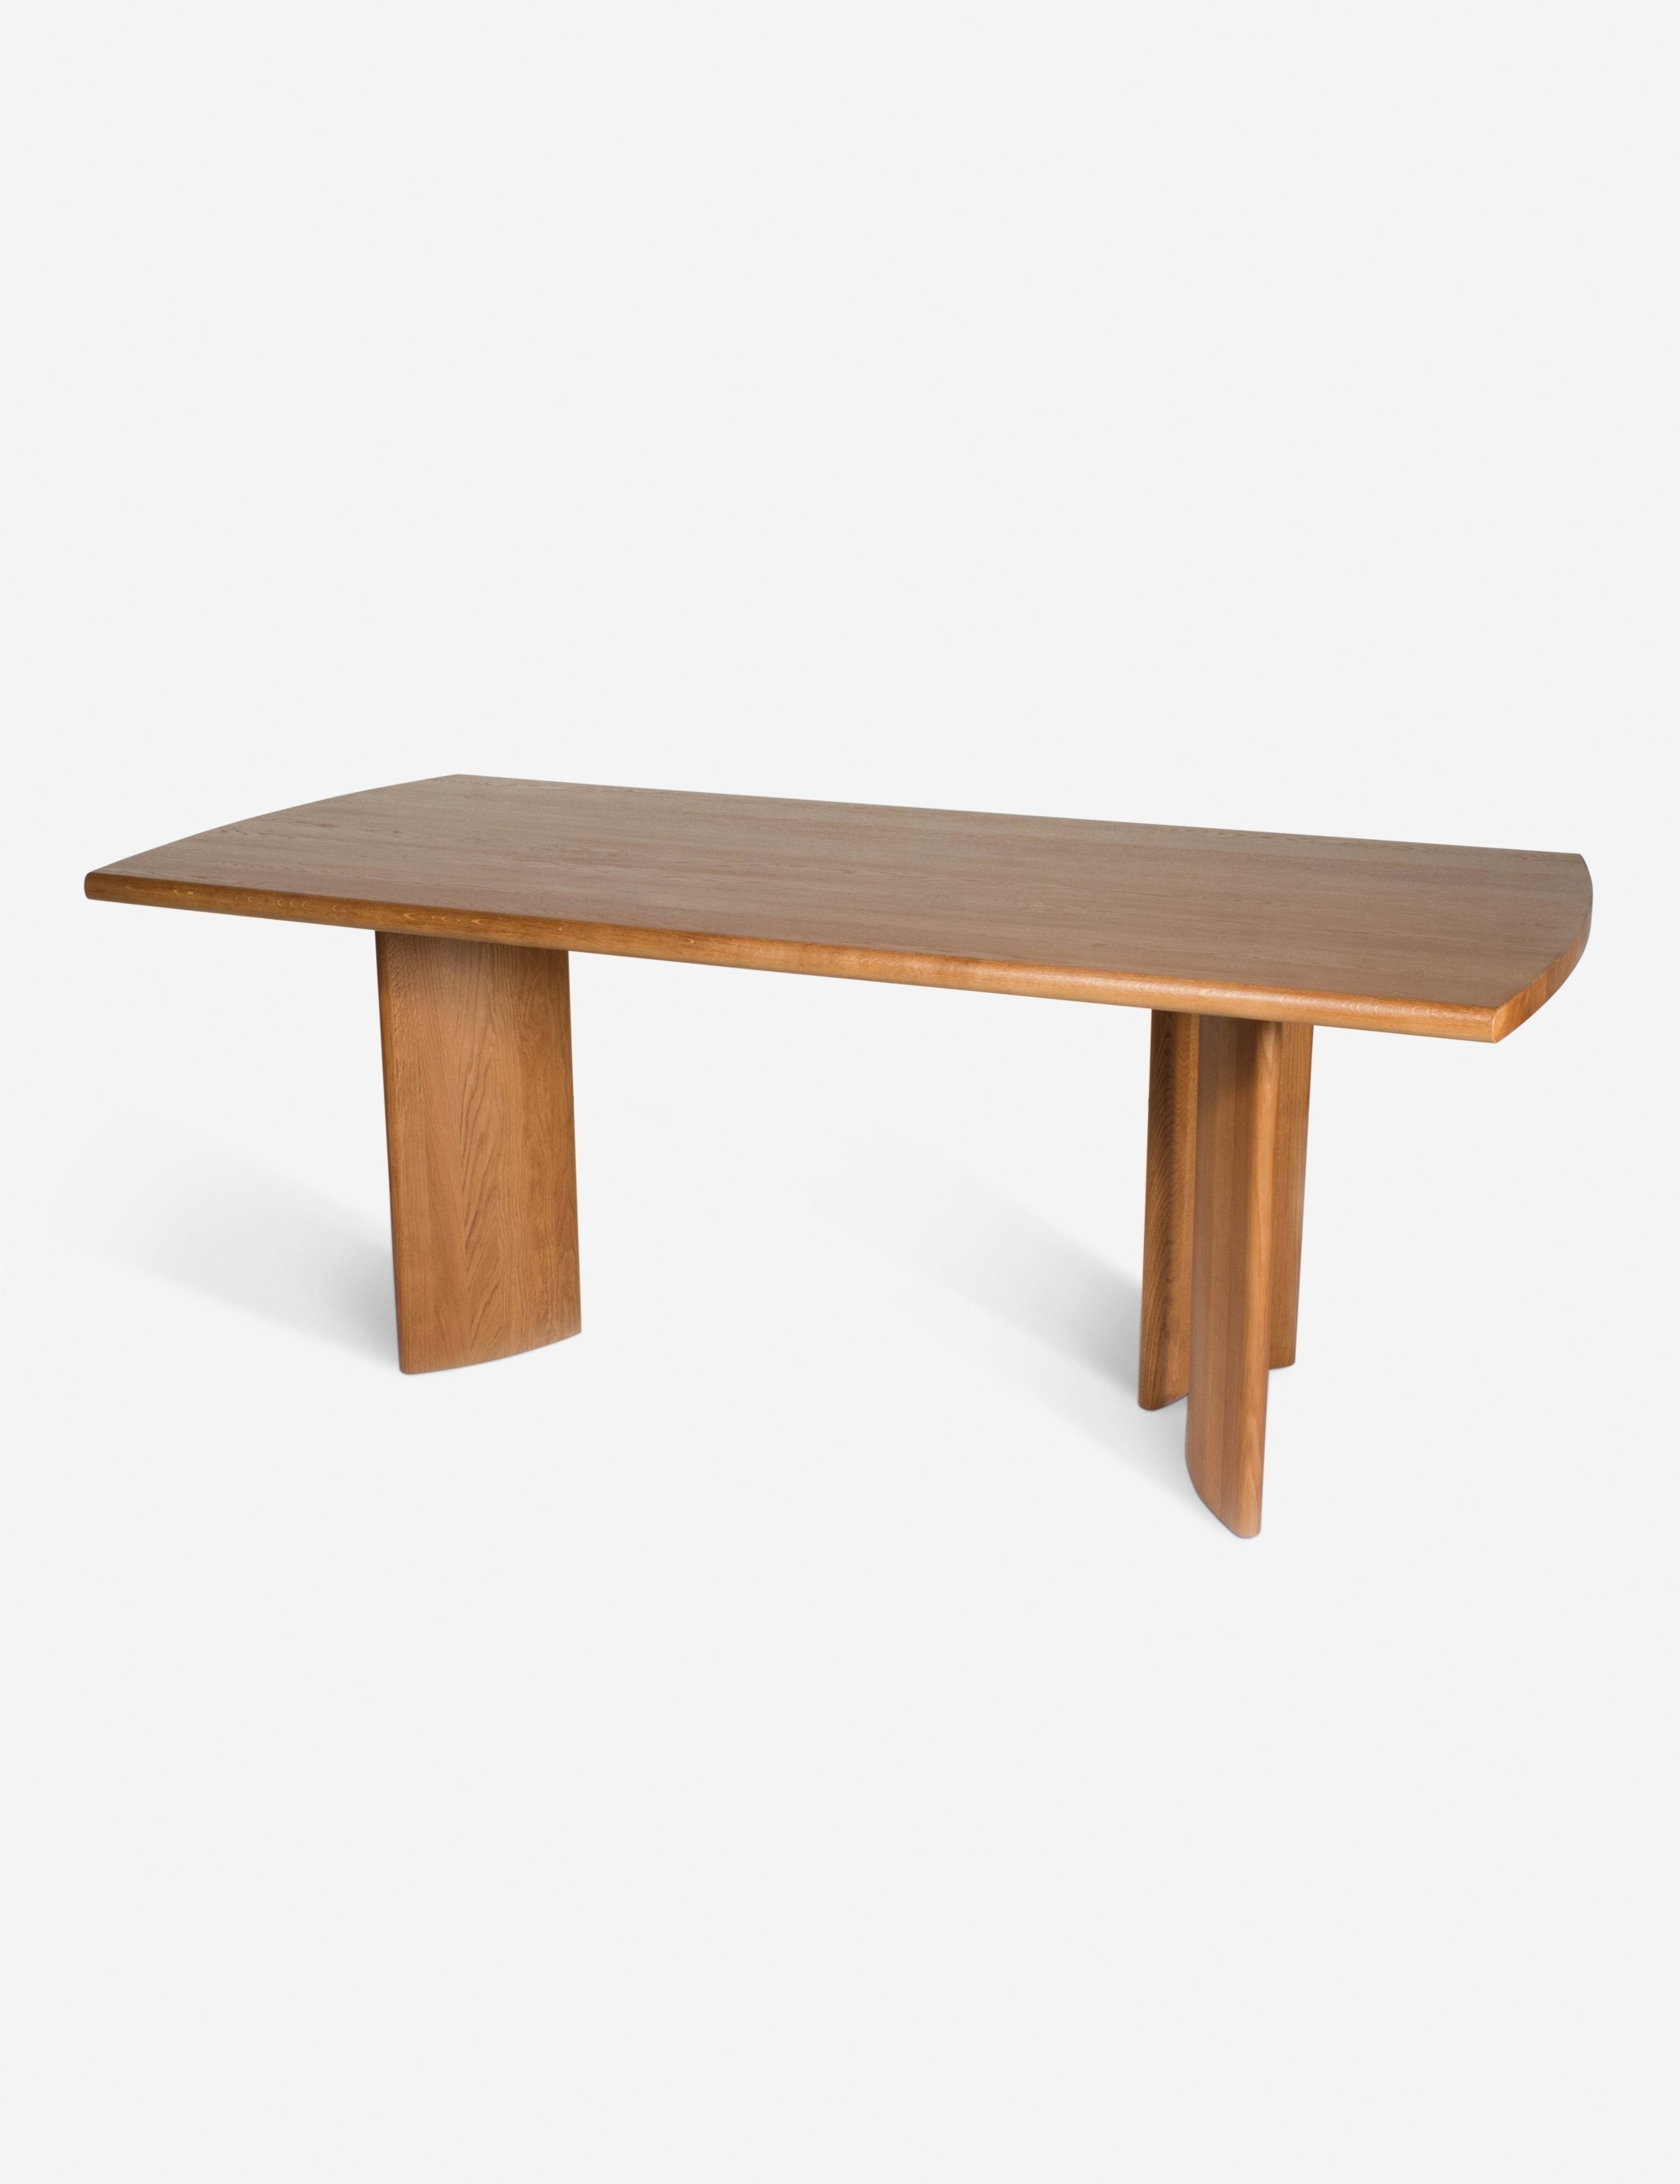 Crest Dining Table by Sun at Six - Image 1